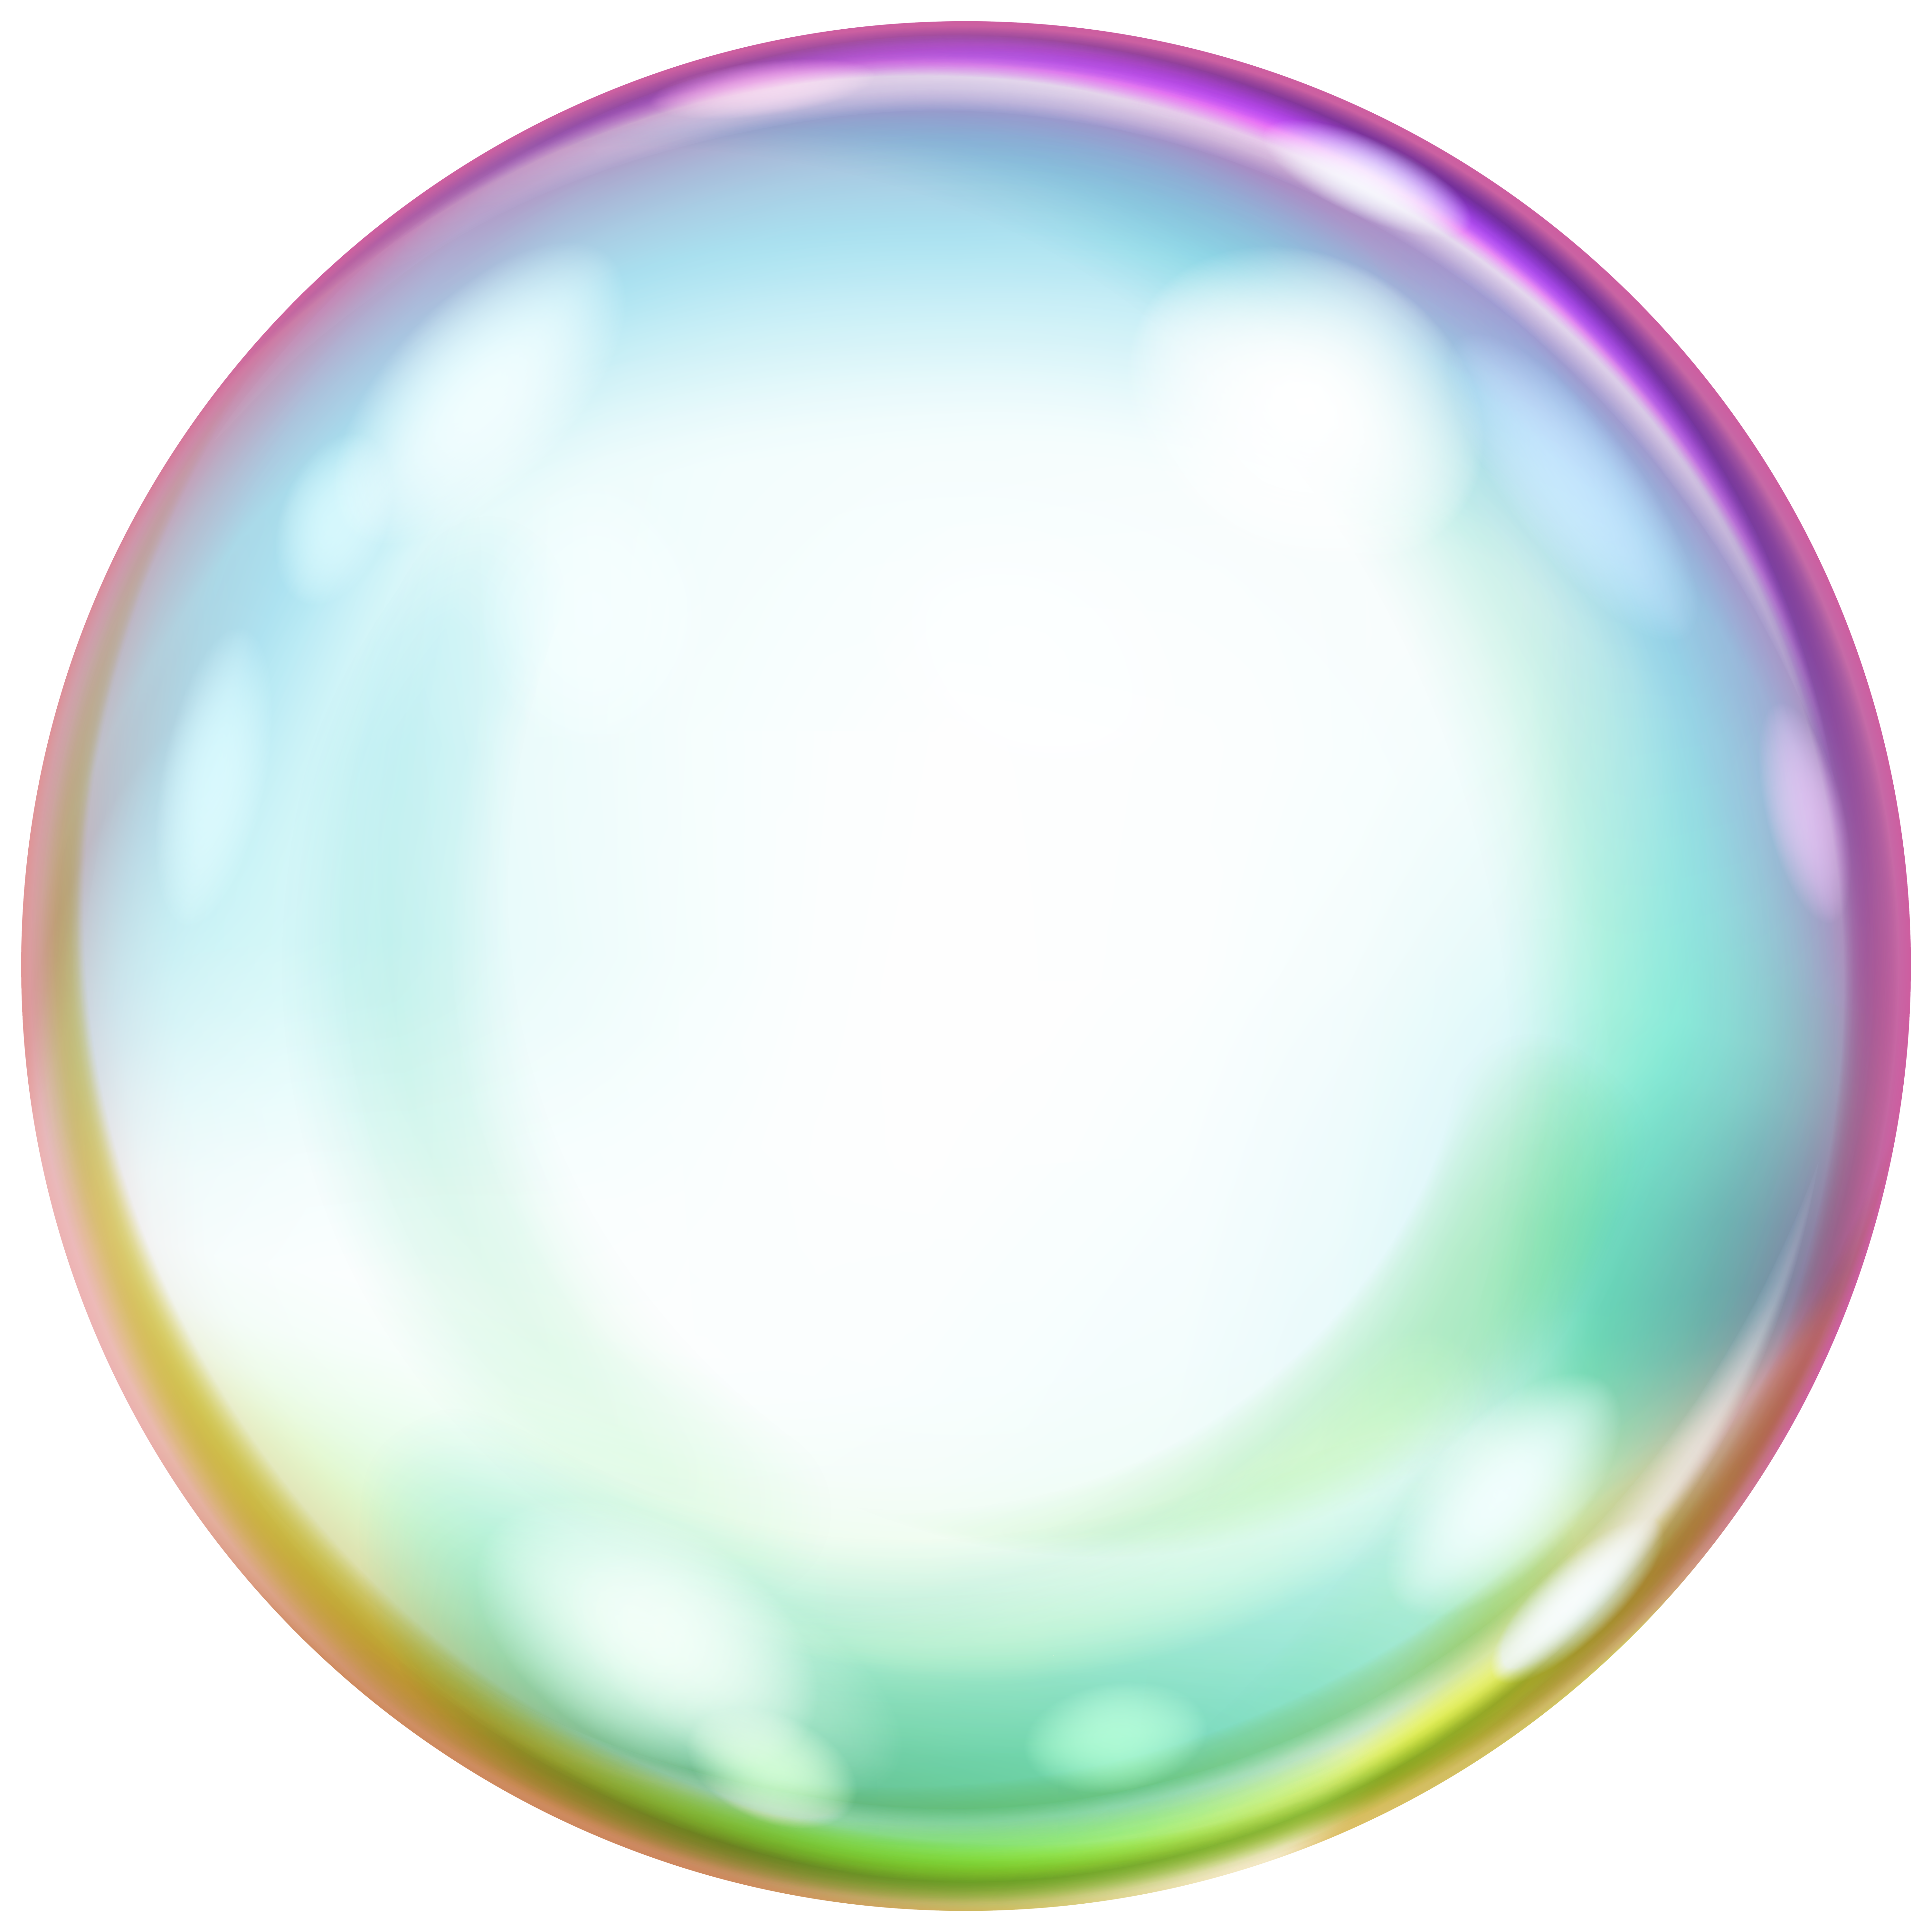 Bubble Sphere PNG Clip Art Image | Gallery Yopriceville - High-Quality